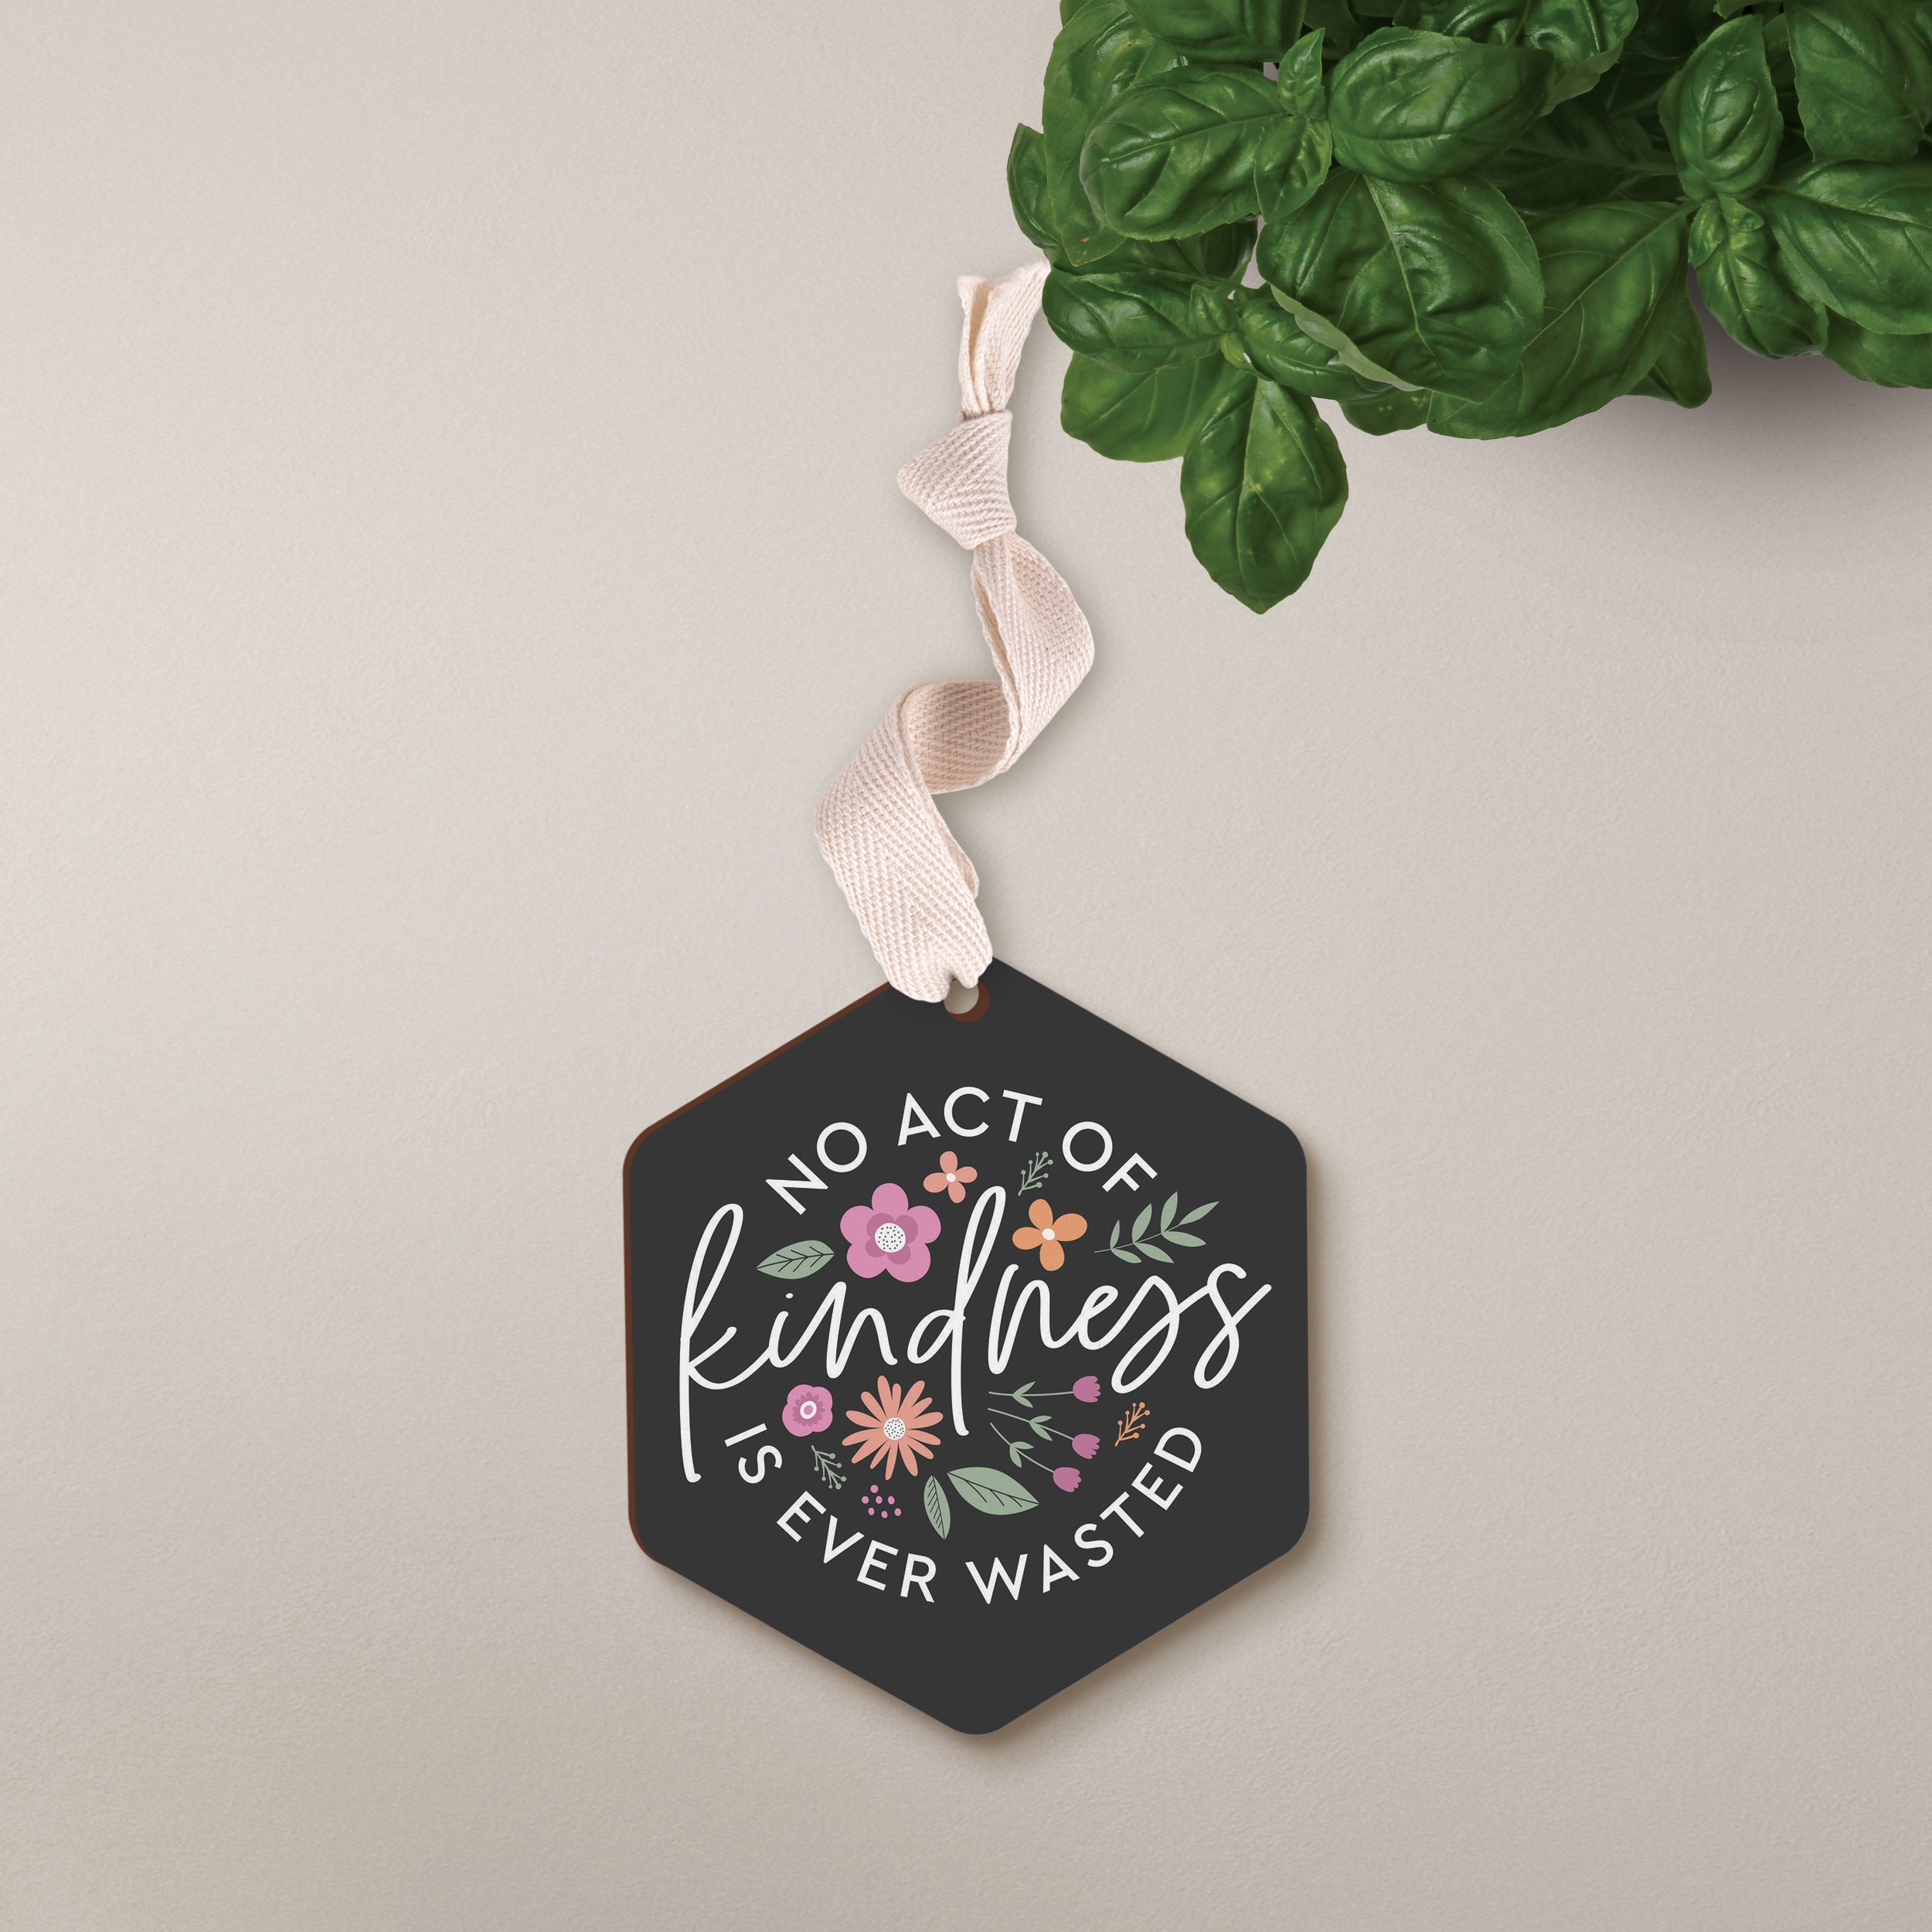 No Act of Kindness Is Ever Wasted Decorative Hanging Sign